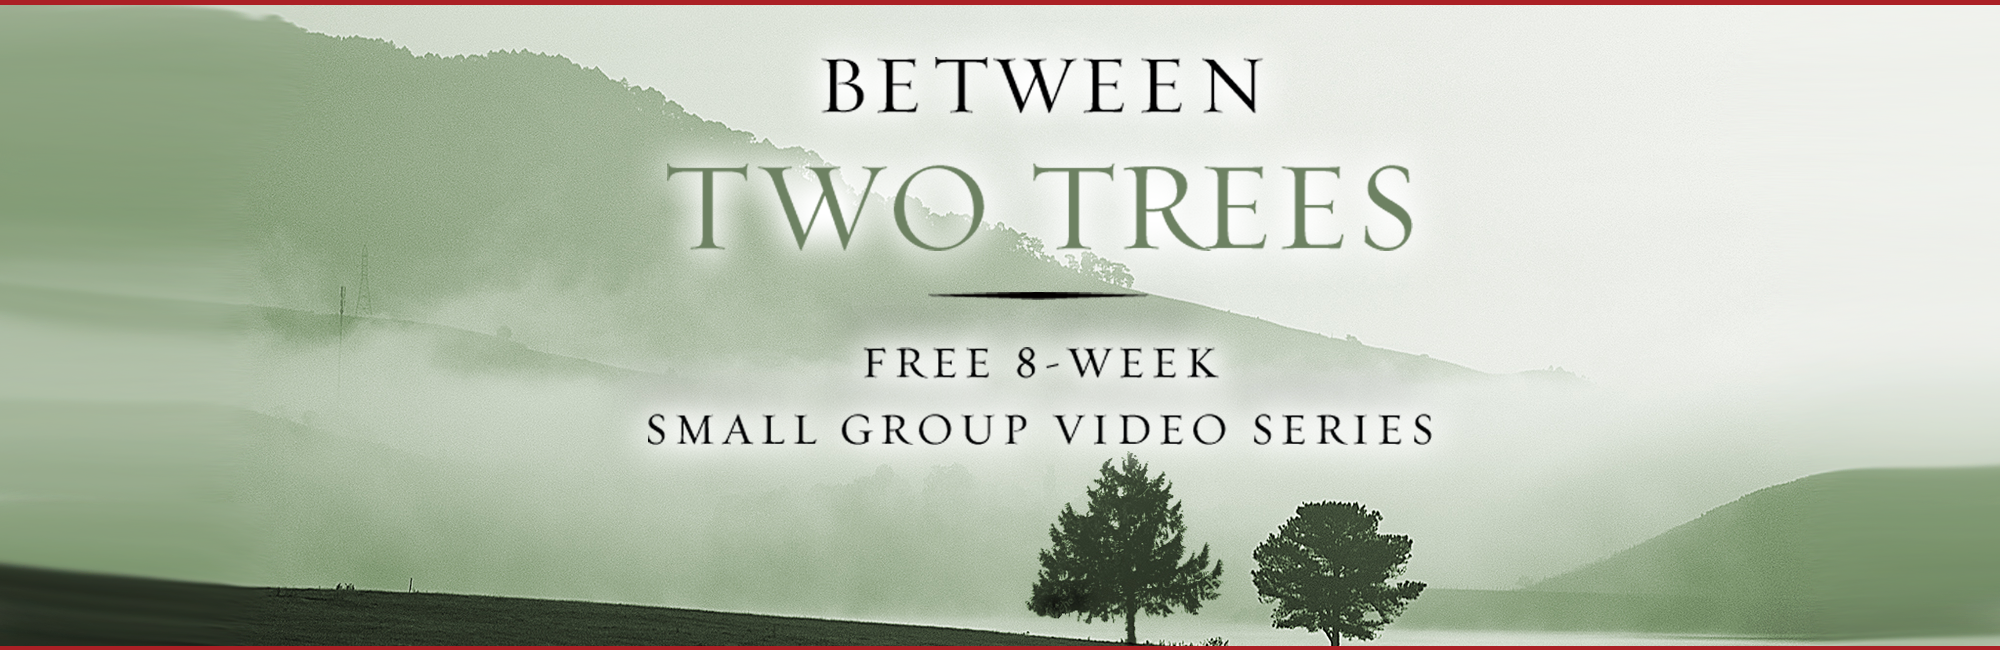 Between Two Trees: Small Group Video Series